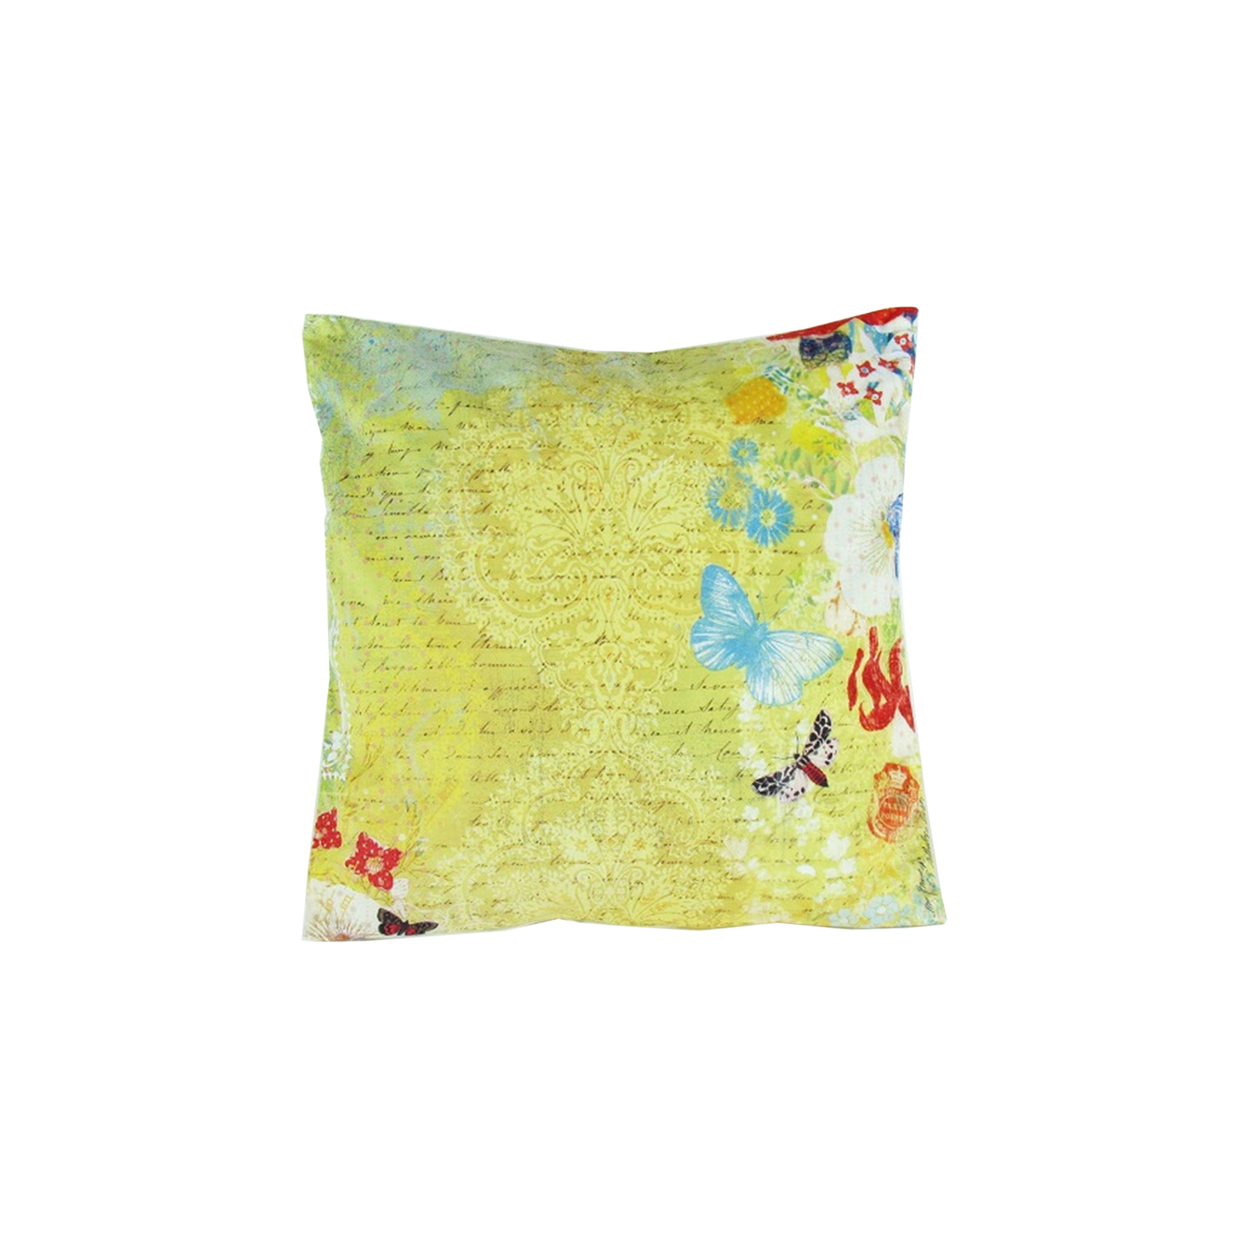 Fabric Decorative Pillow With Scripted Details, Yellow- Saltoro Sherpi